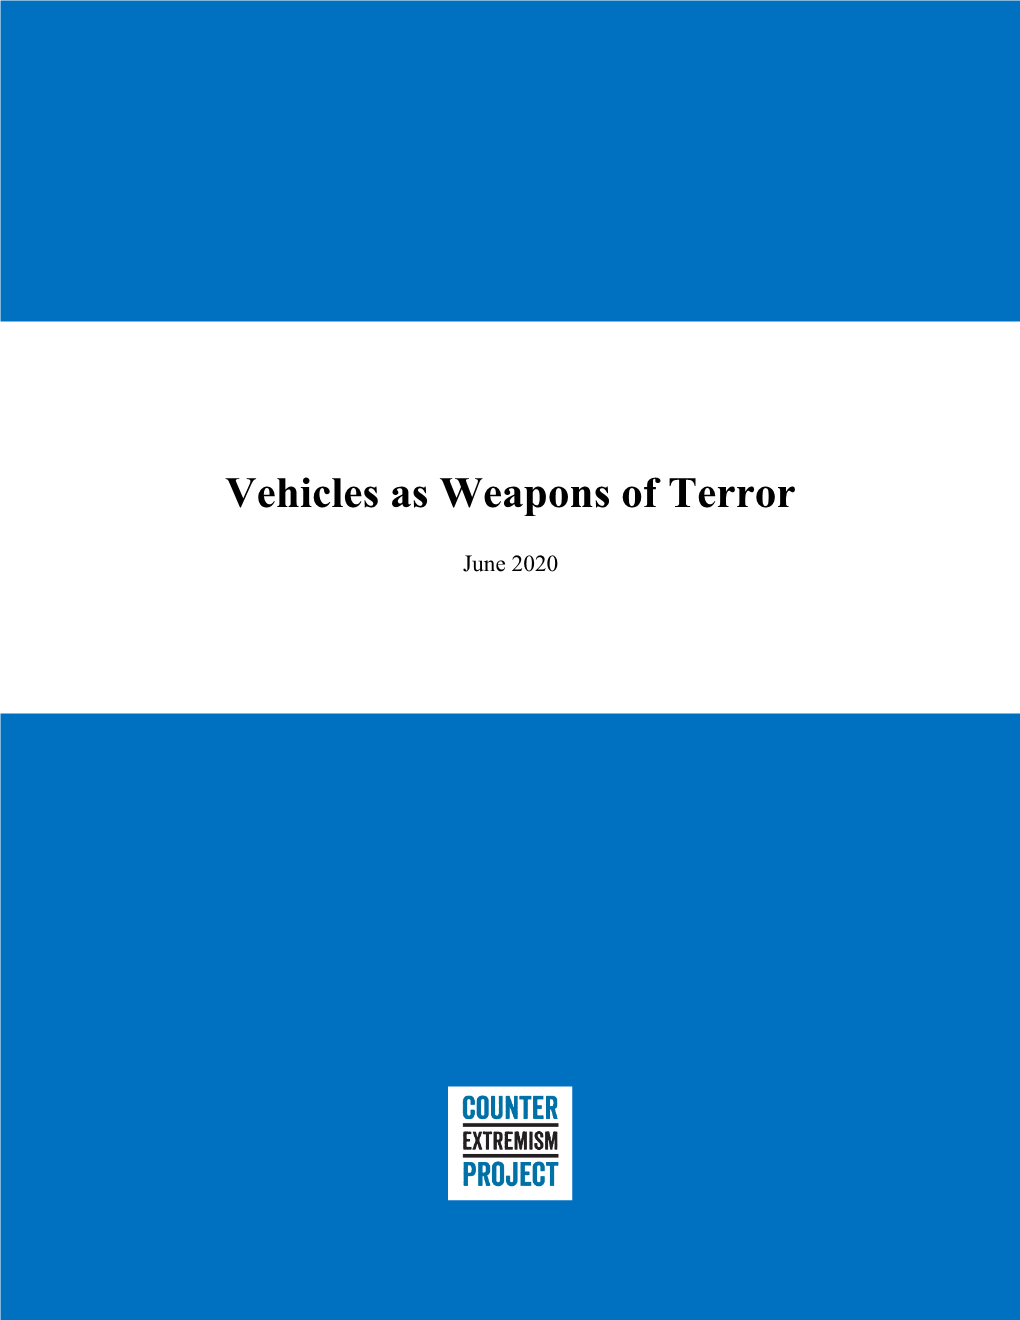 Vehicles As Weapons of Terror